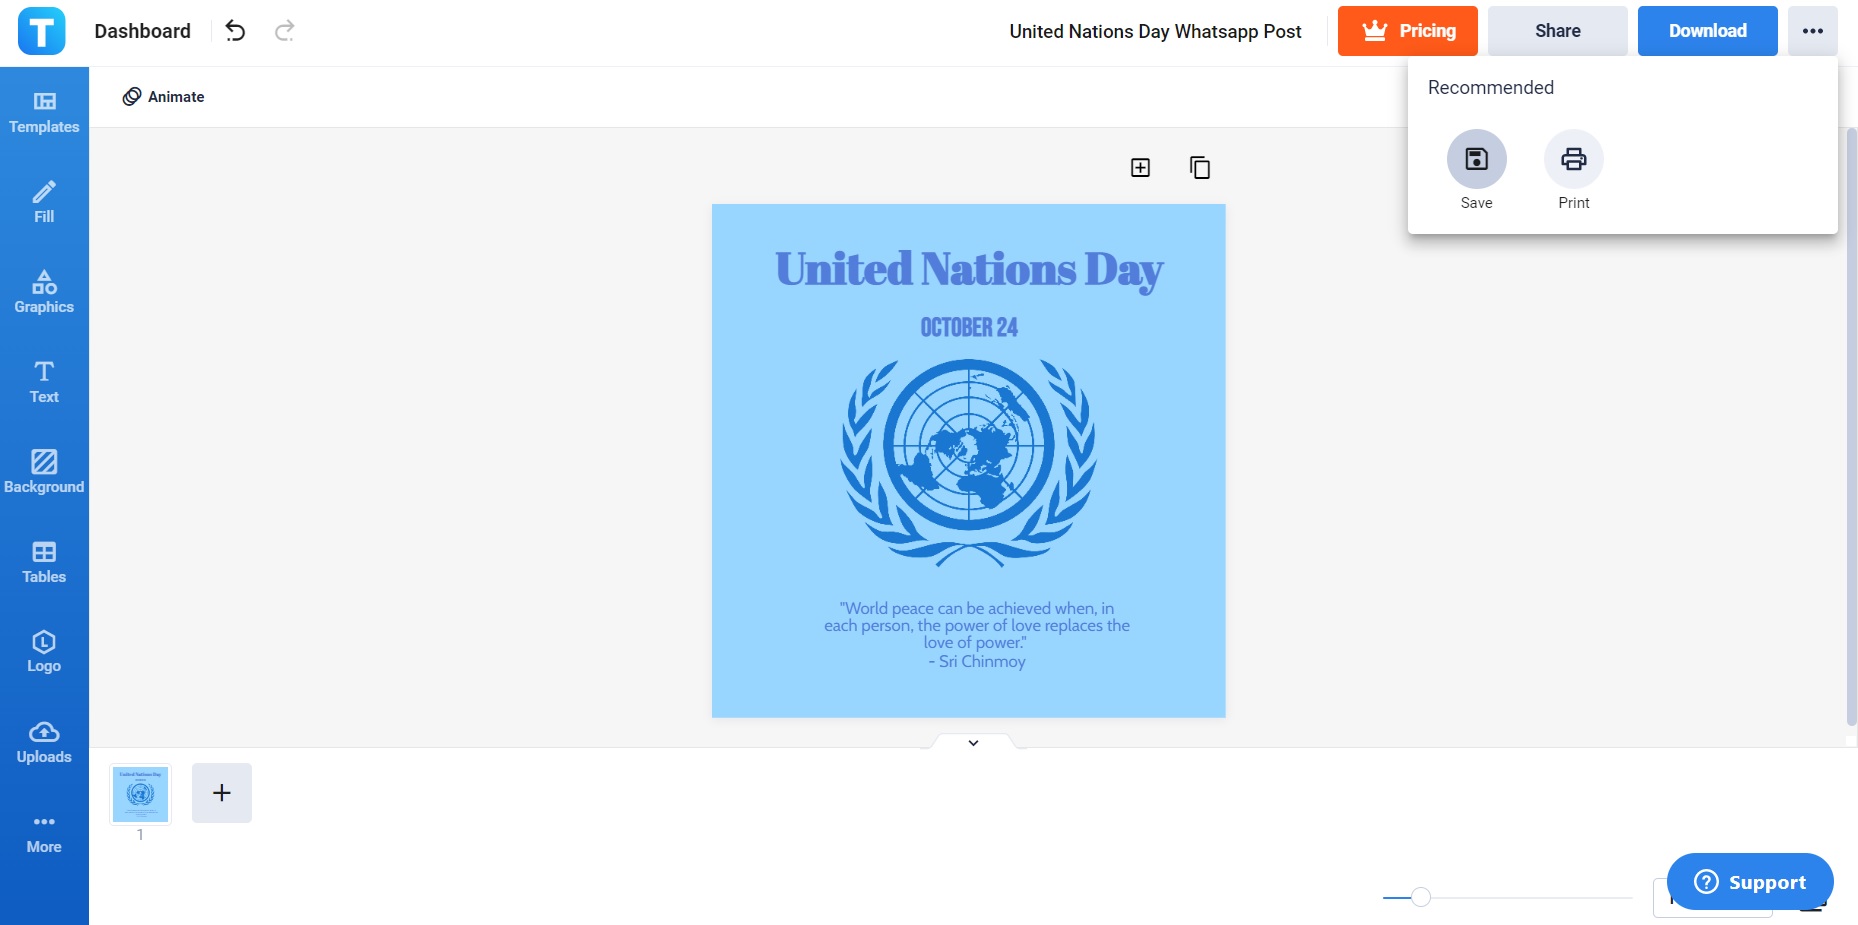 download save and upload your new whatsapp post for united nations day